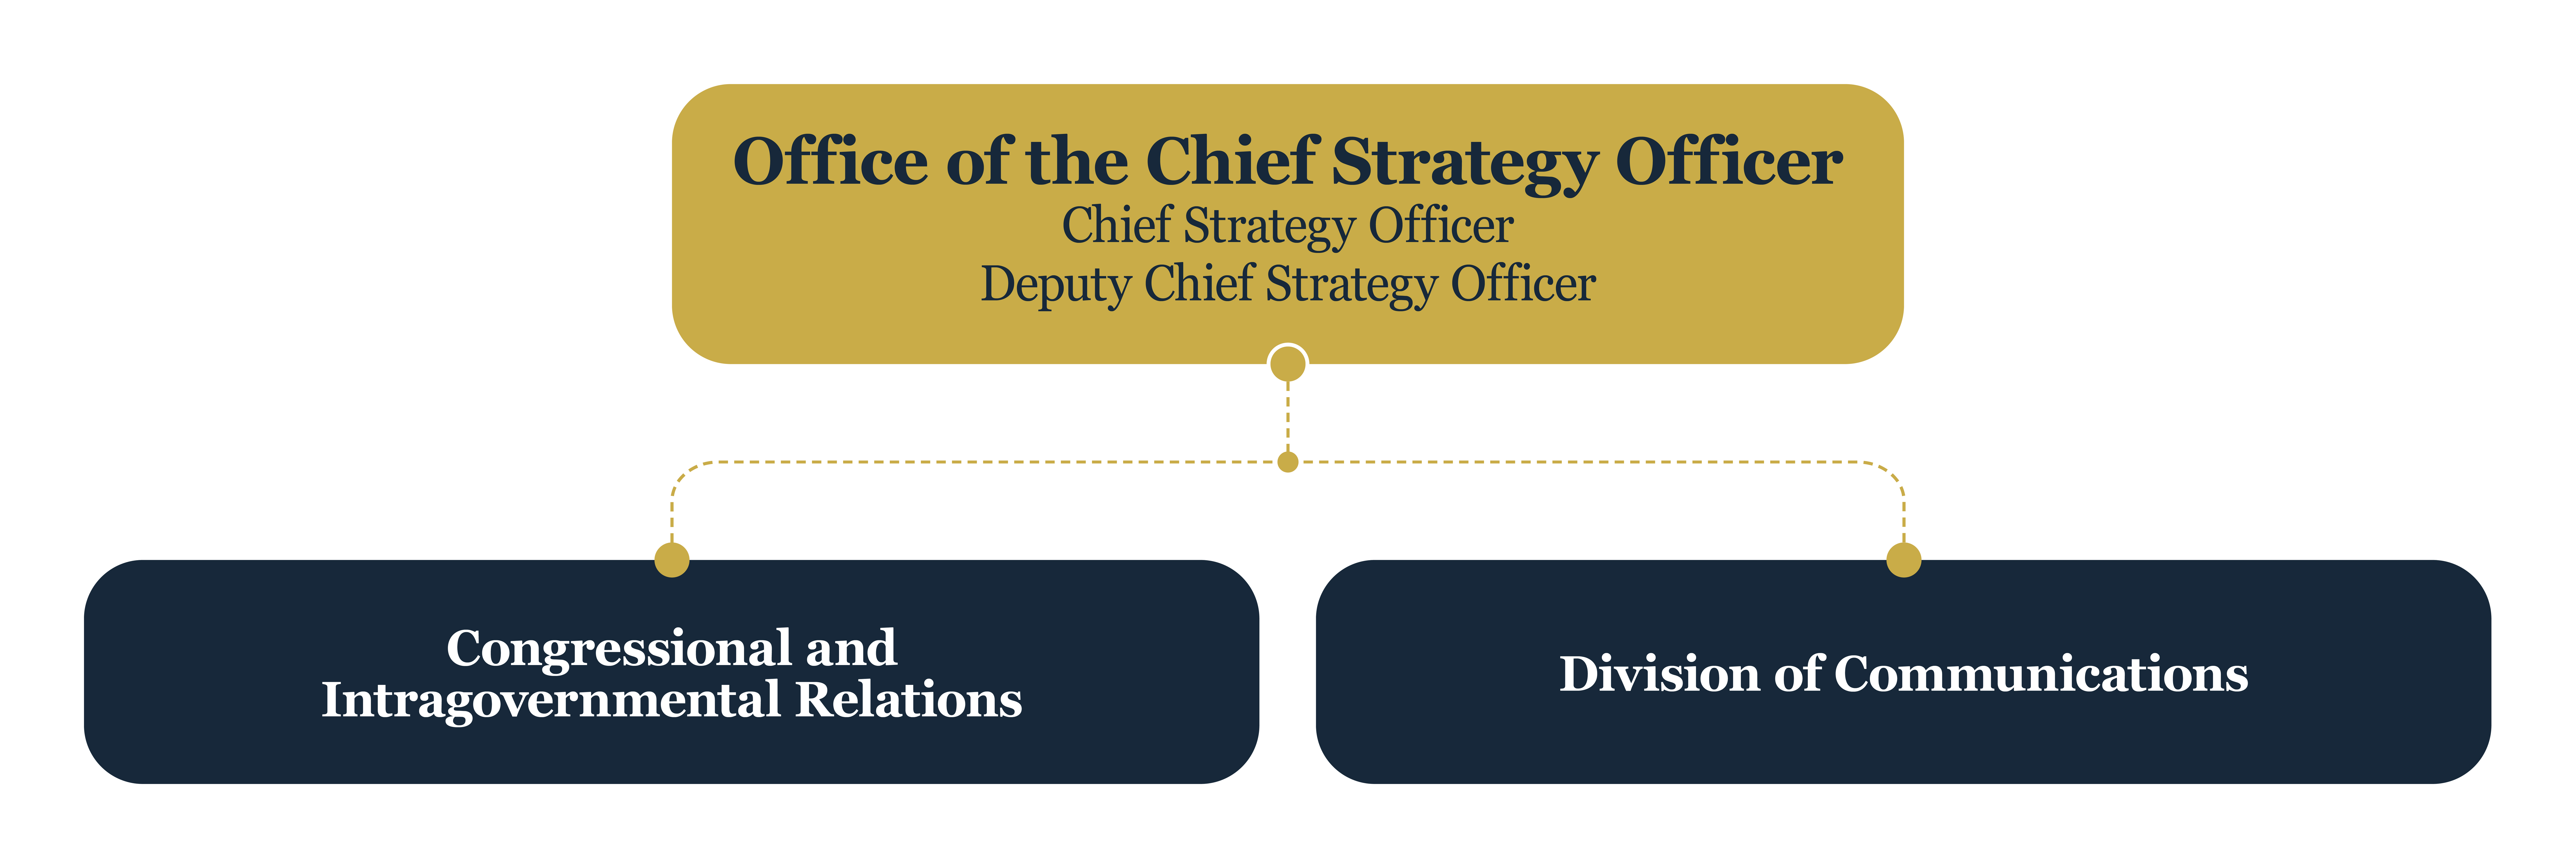 Office of the Chief Strategy Officer